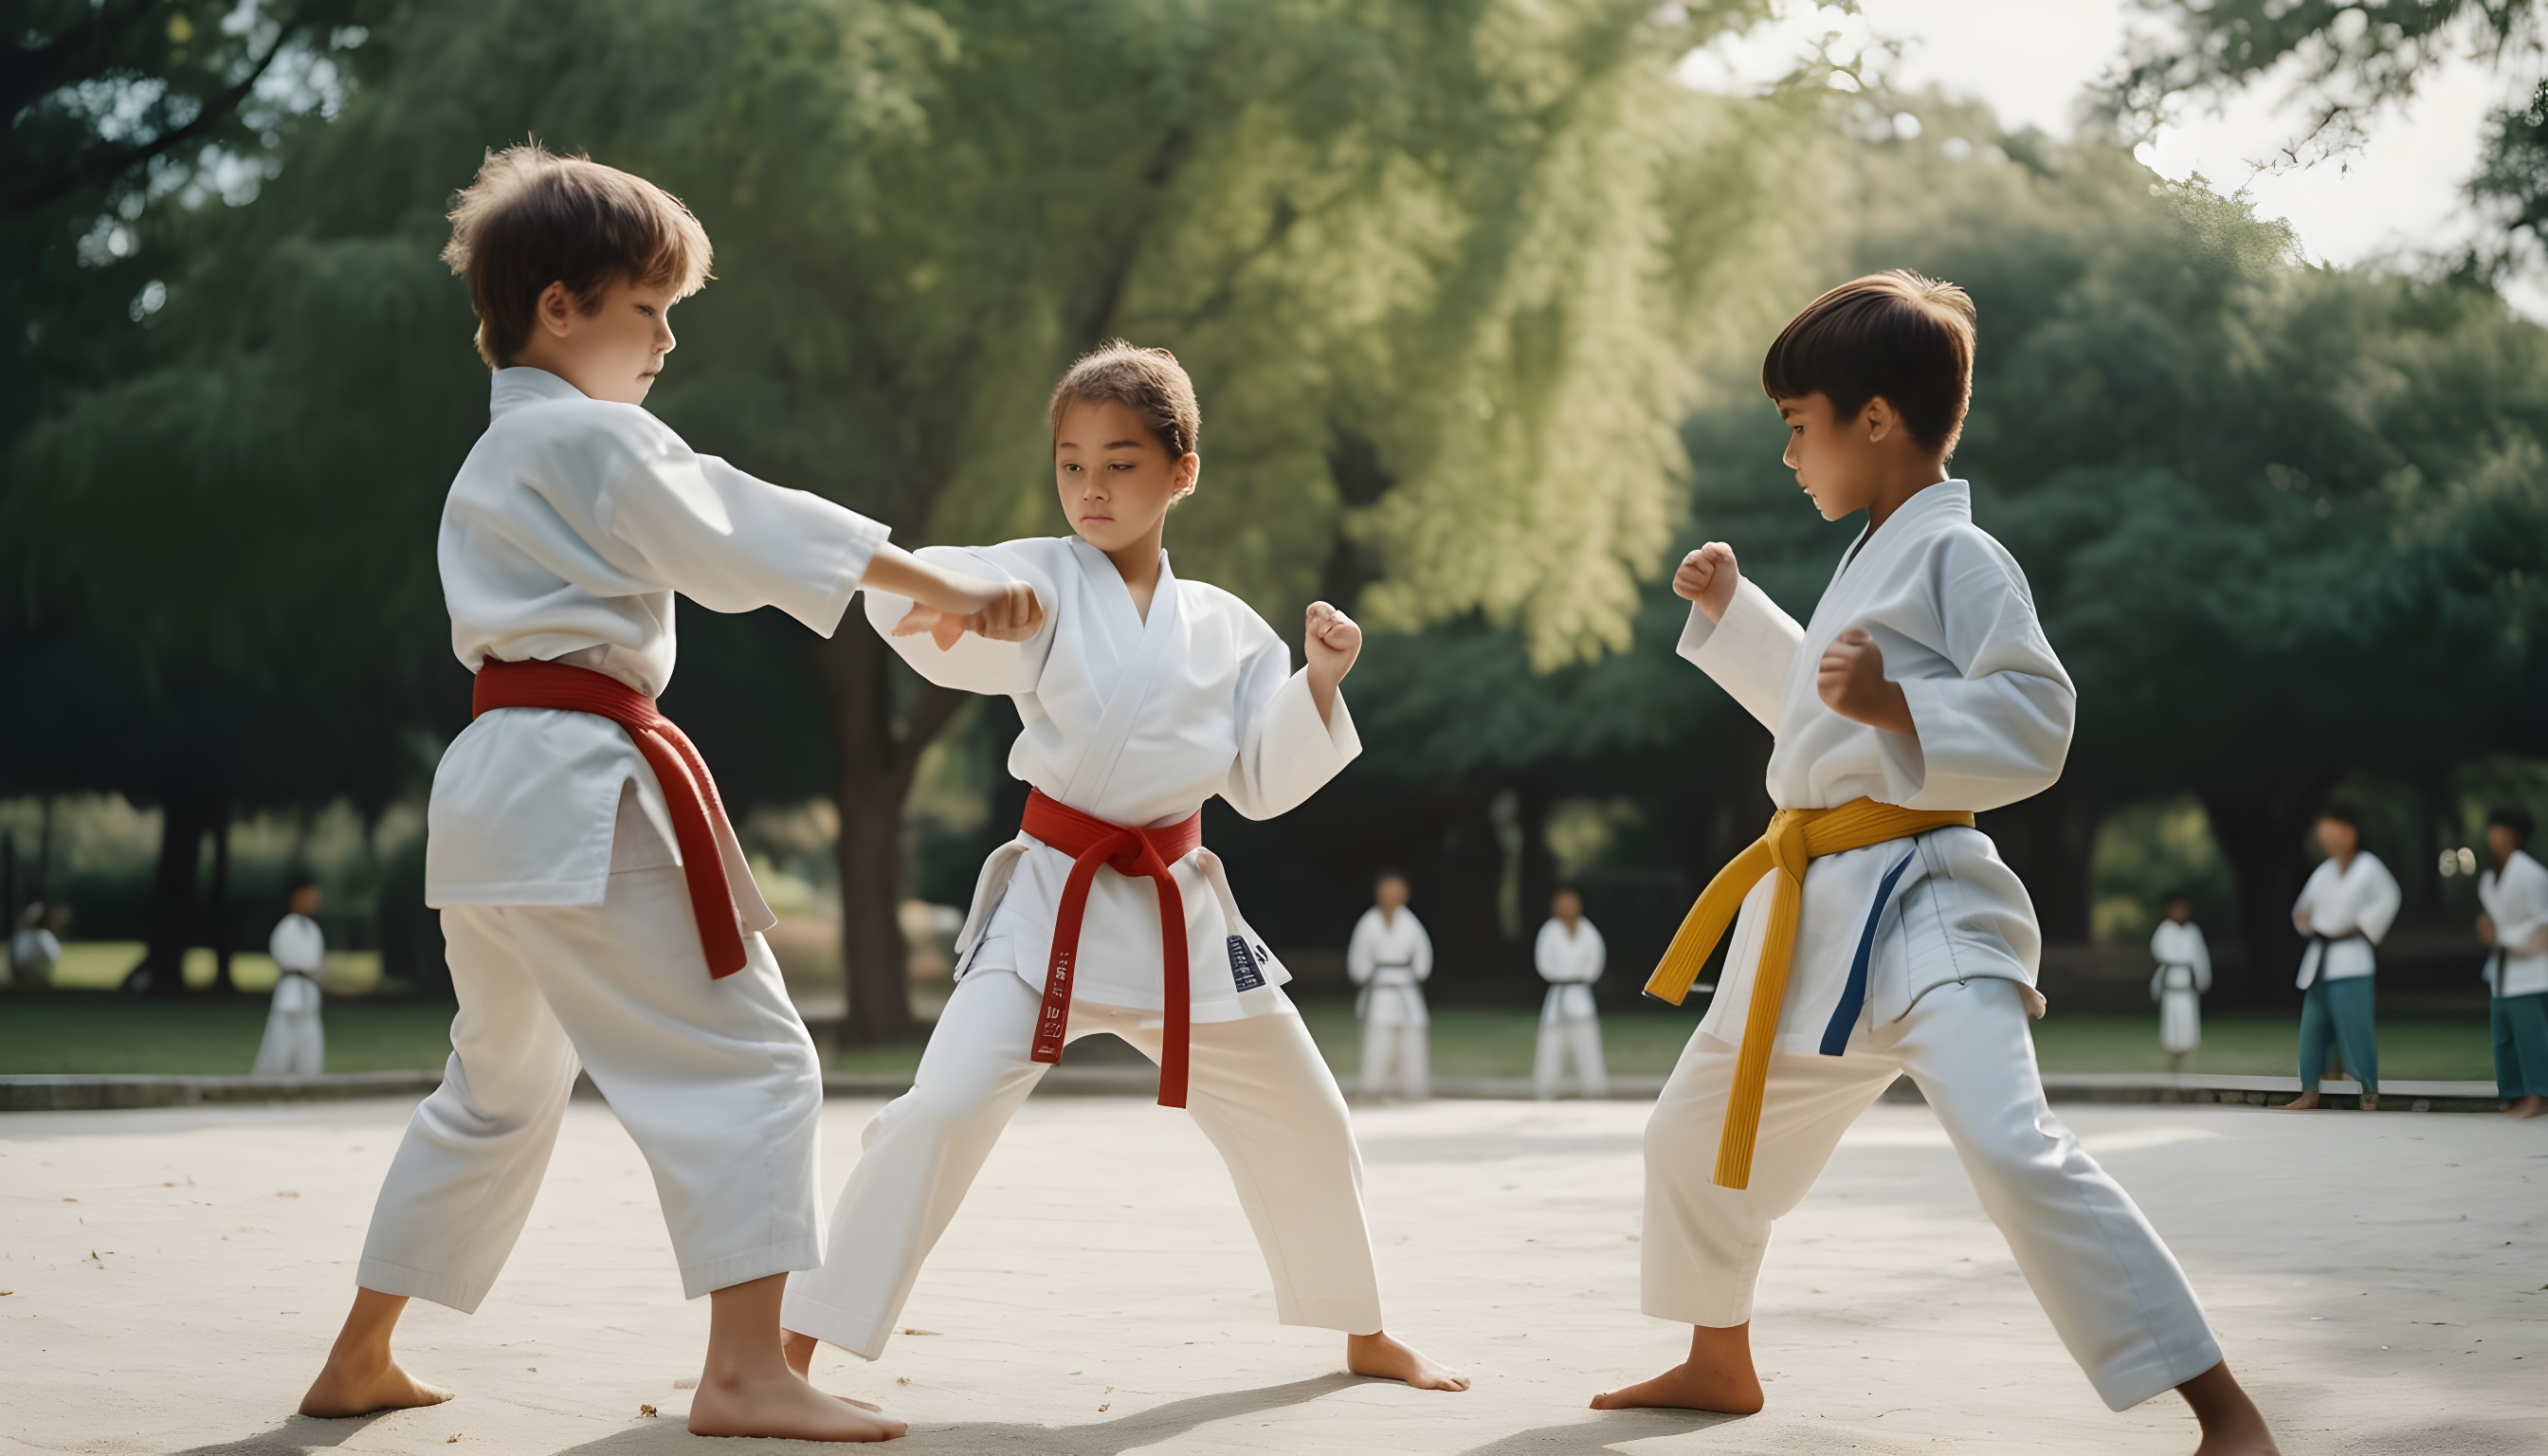 2-kids-playing-karate-in-parc-and-surrounding-them-upscaled